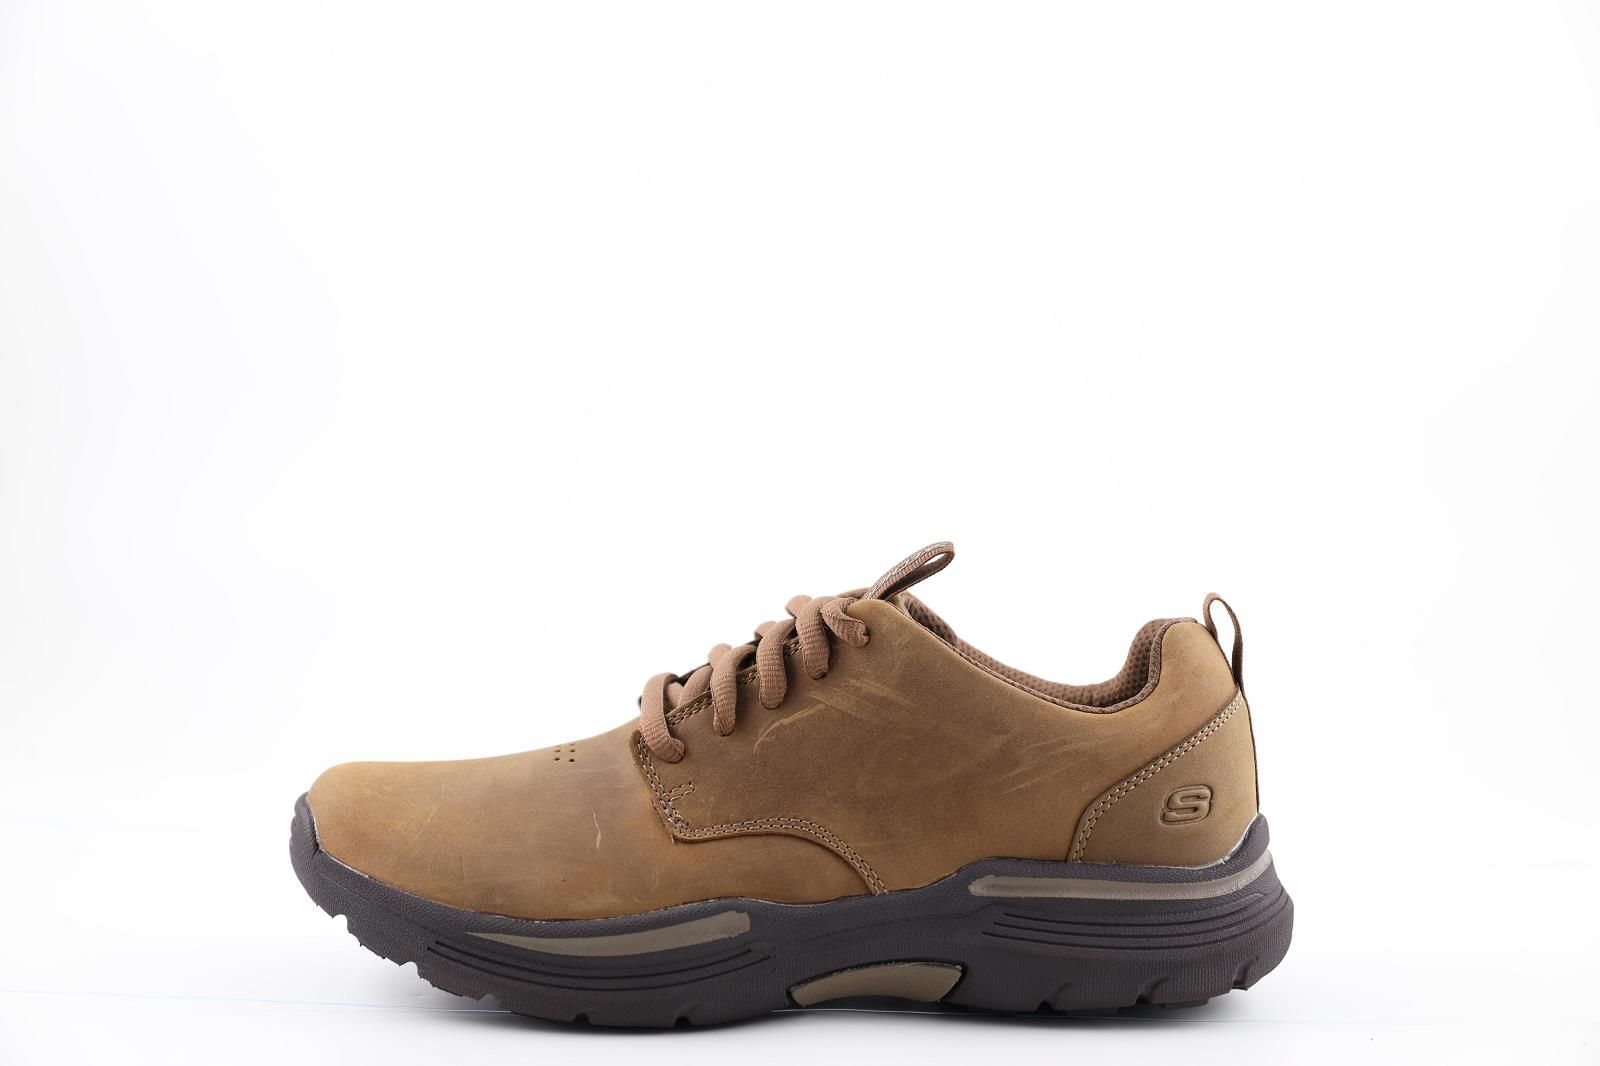 Skechers Chaussures Camel hommes (Expended - 204175) - Marques à Suivre